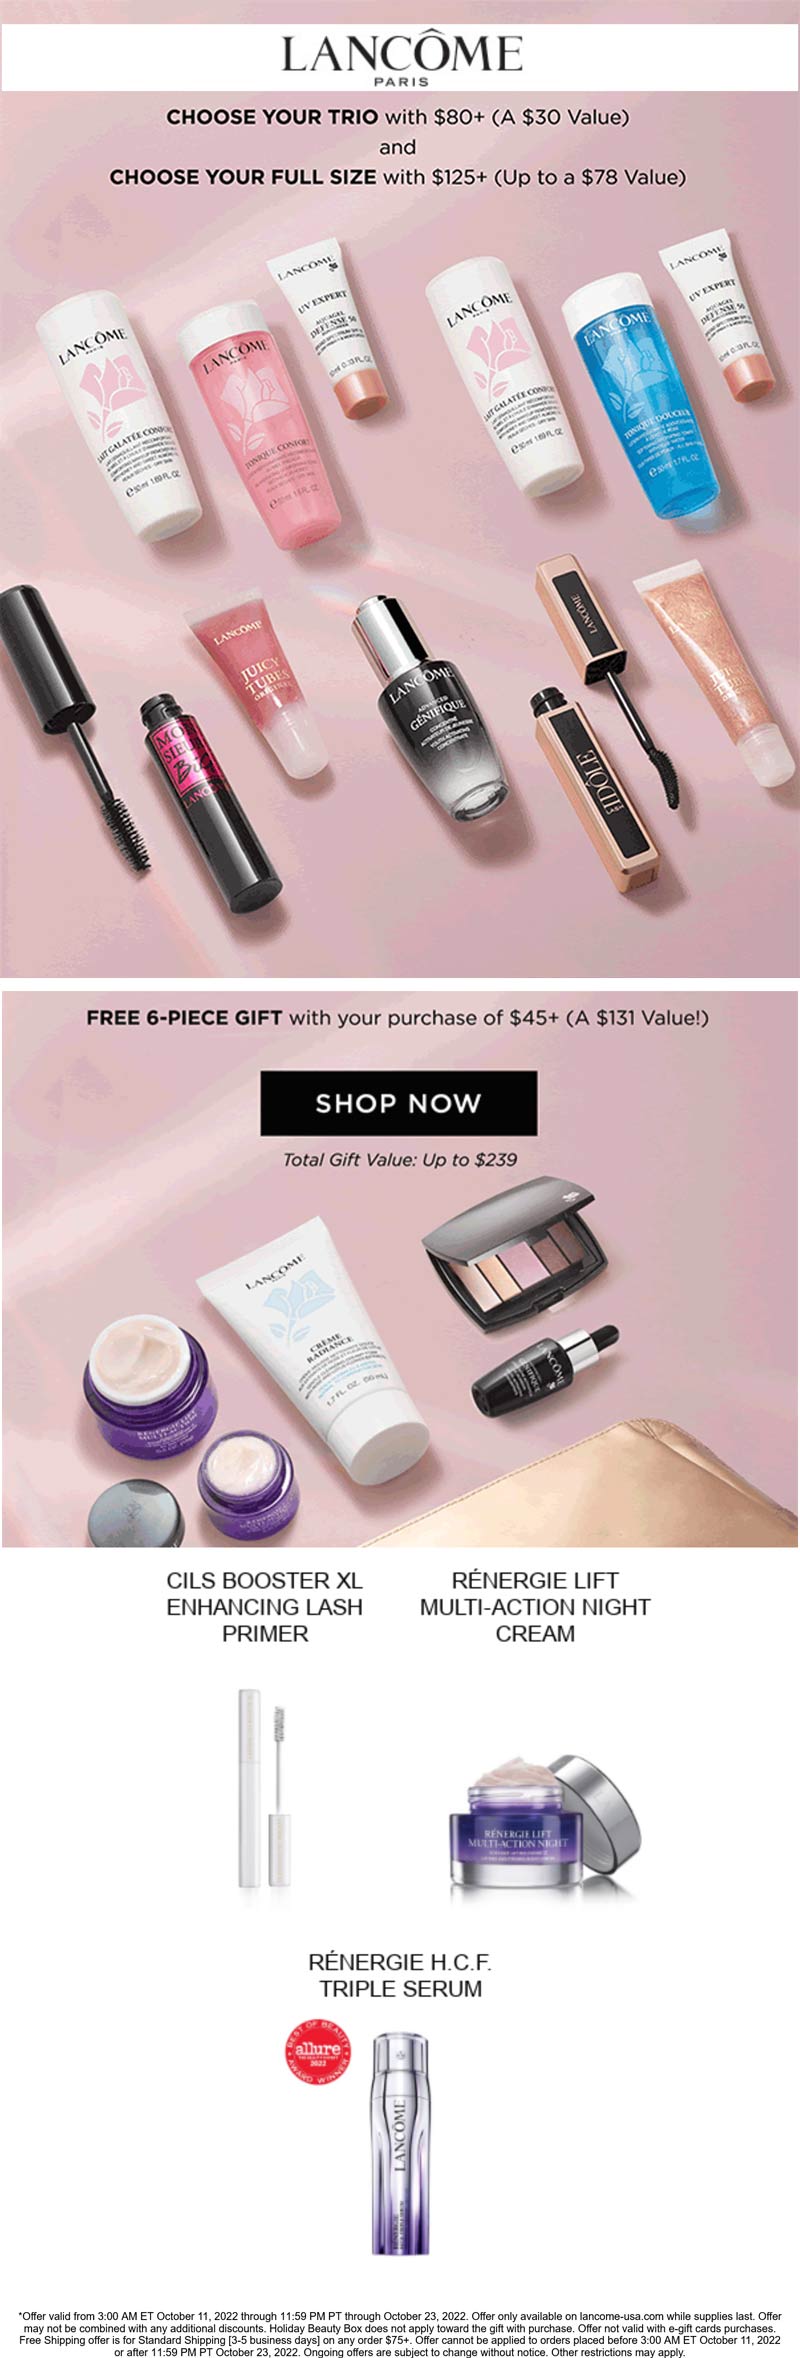 Lancome stores Coupon  Free full size on $125 & more at Lancome cosmetics #lancome 